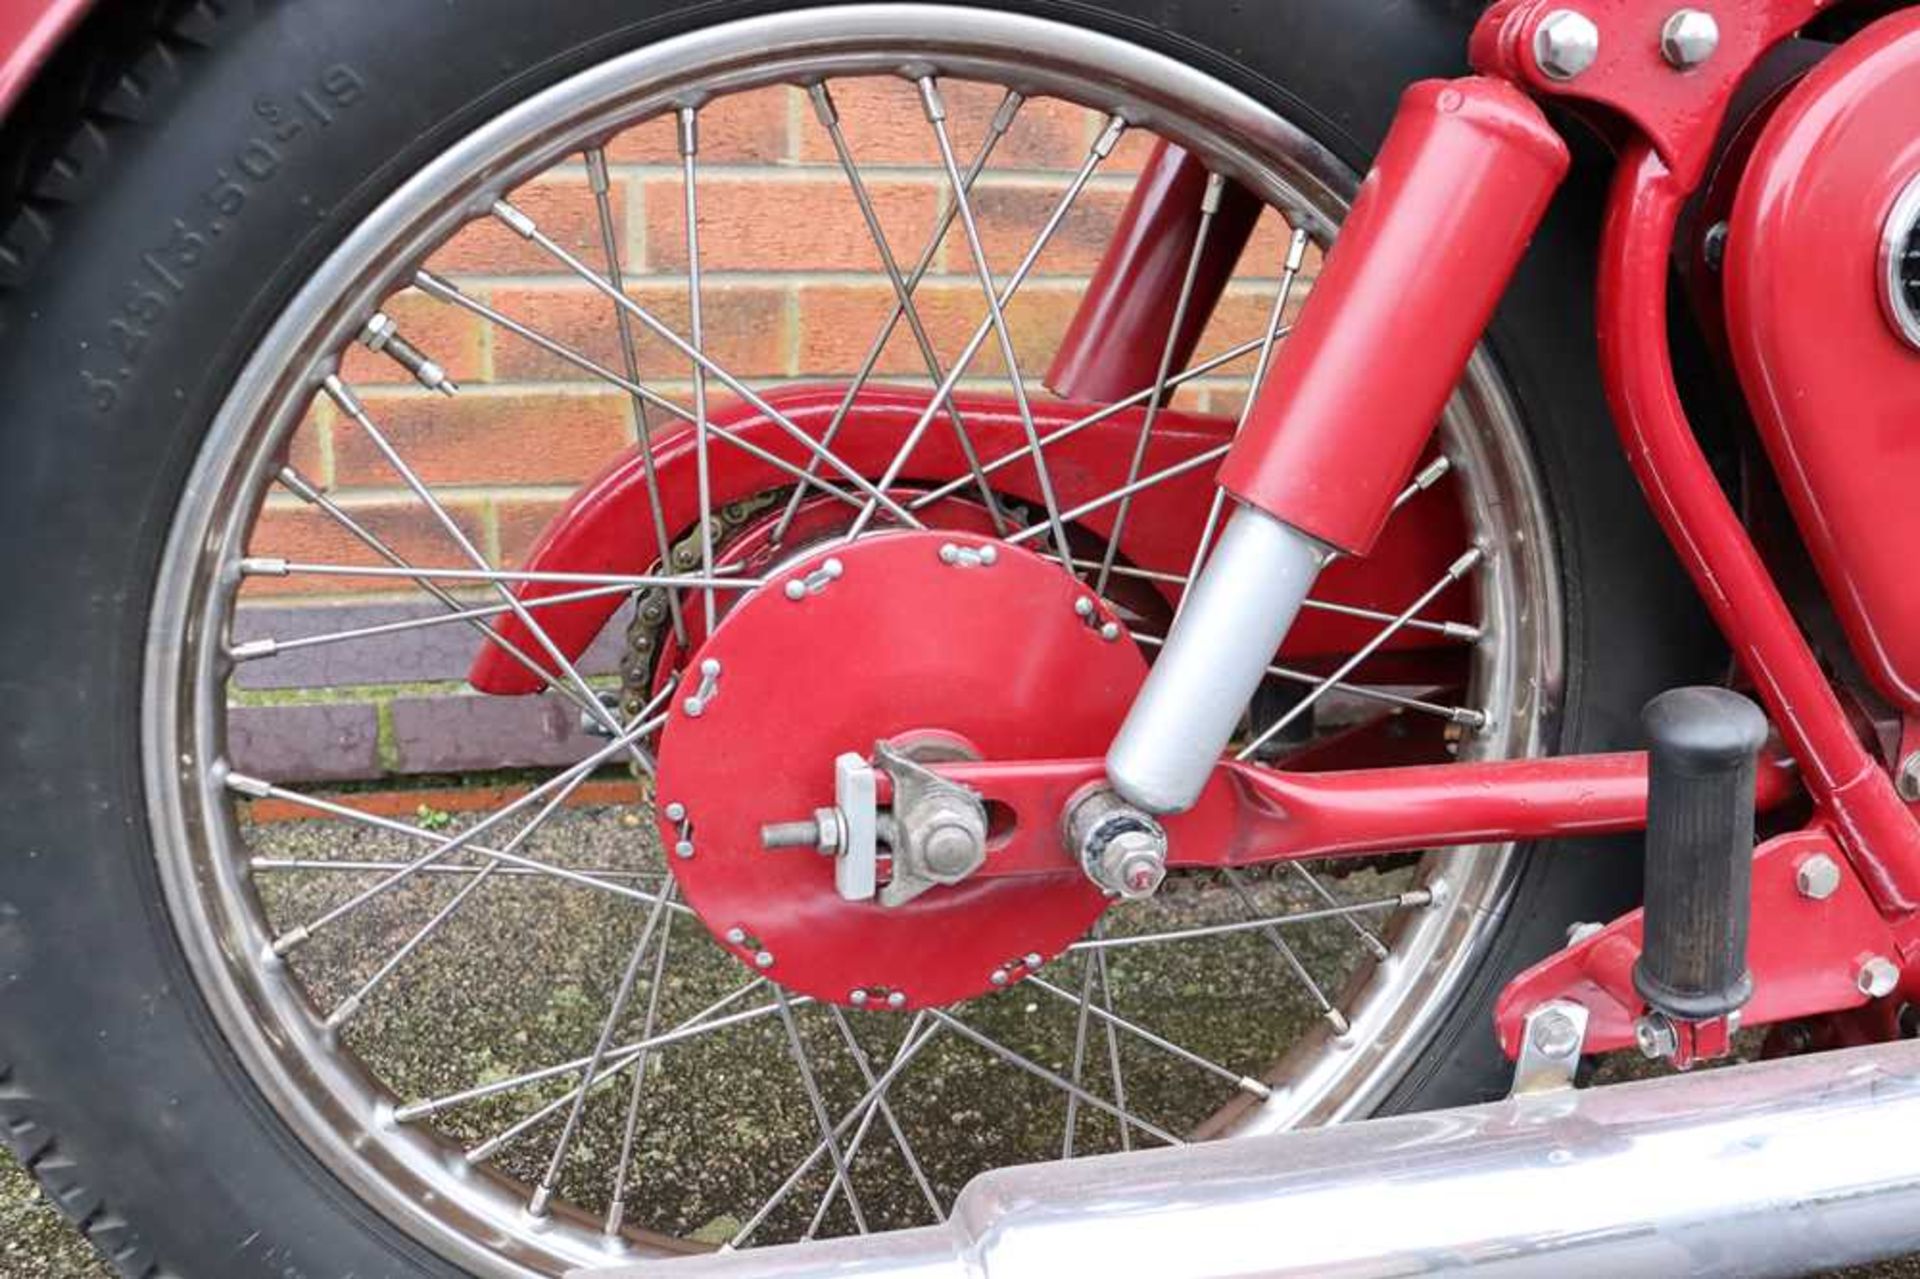 1956 BSA C12 Stainless steel rims and spokes - Image 27 of 44